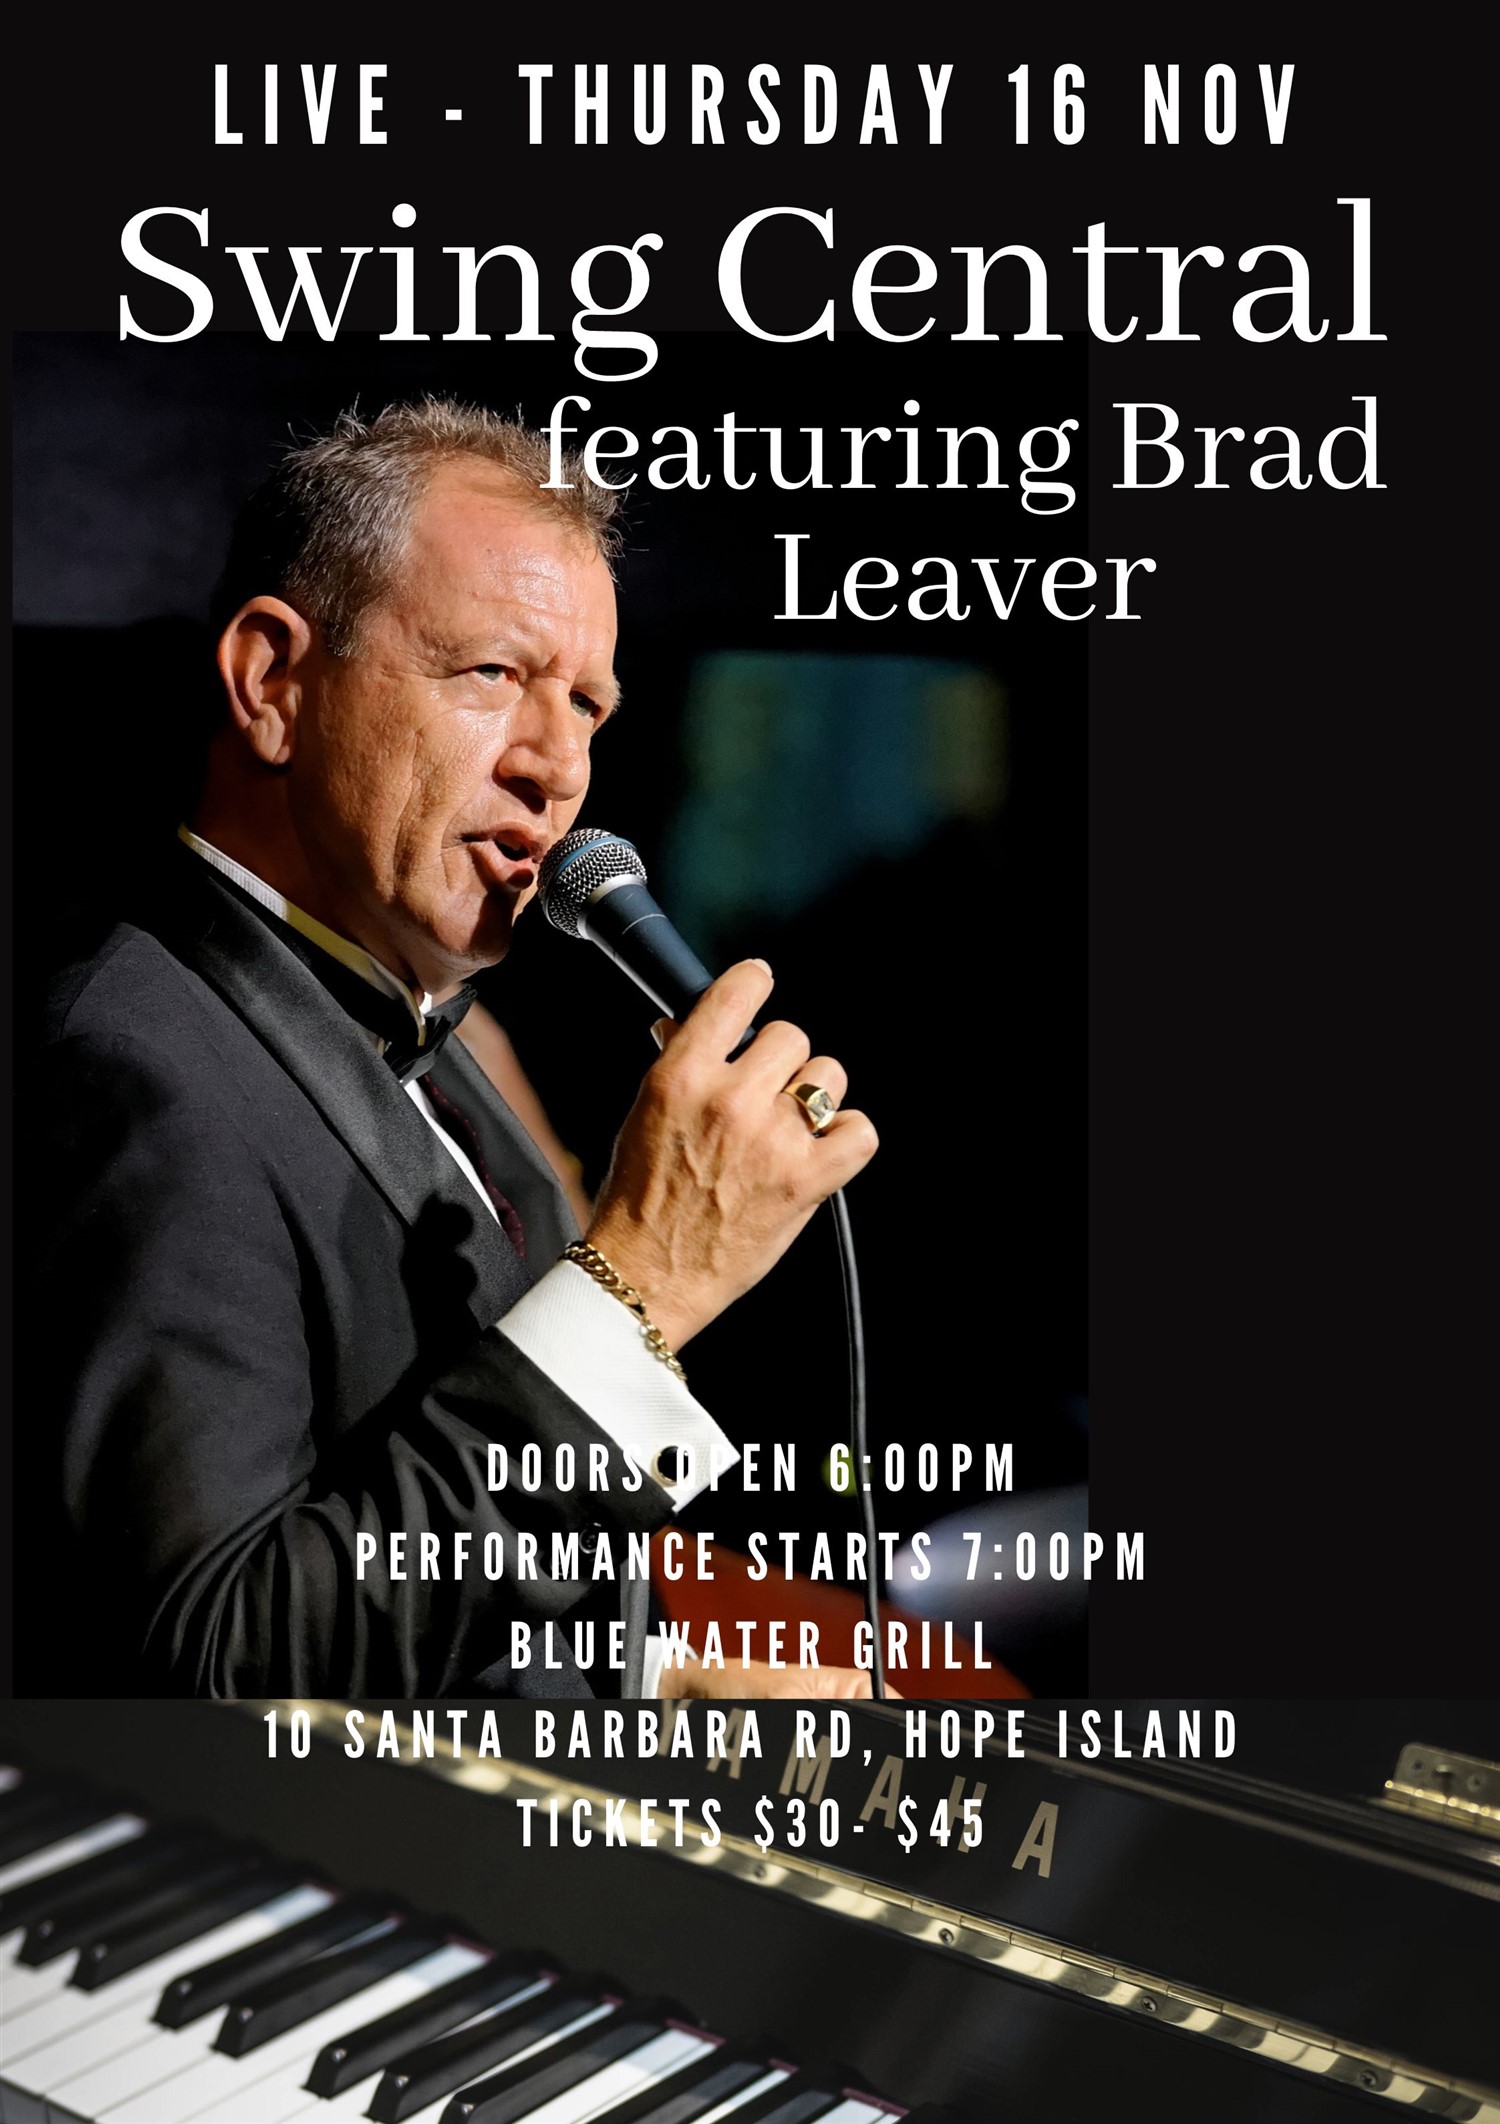 Swing Central featuring Brad Leaver  on Nov 16, 18:00@Hope Island Jazz - Blue Water Grill - Buy tickets and Get information on Hope Island Jazz hopeislandjazz.com.au